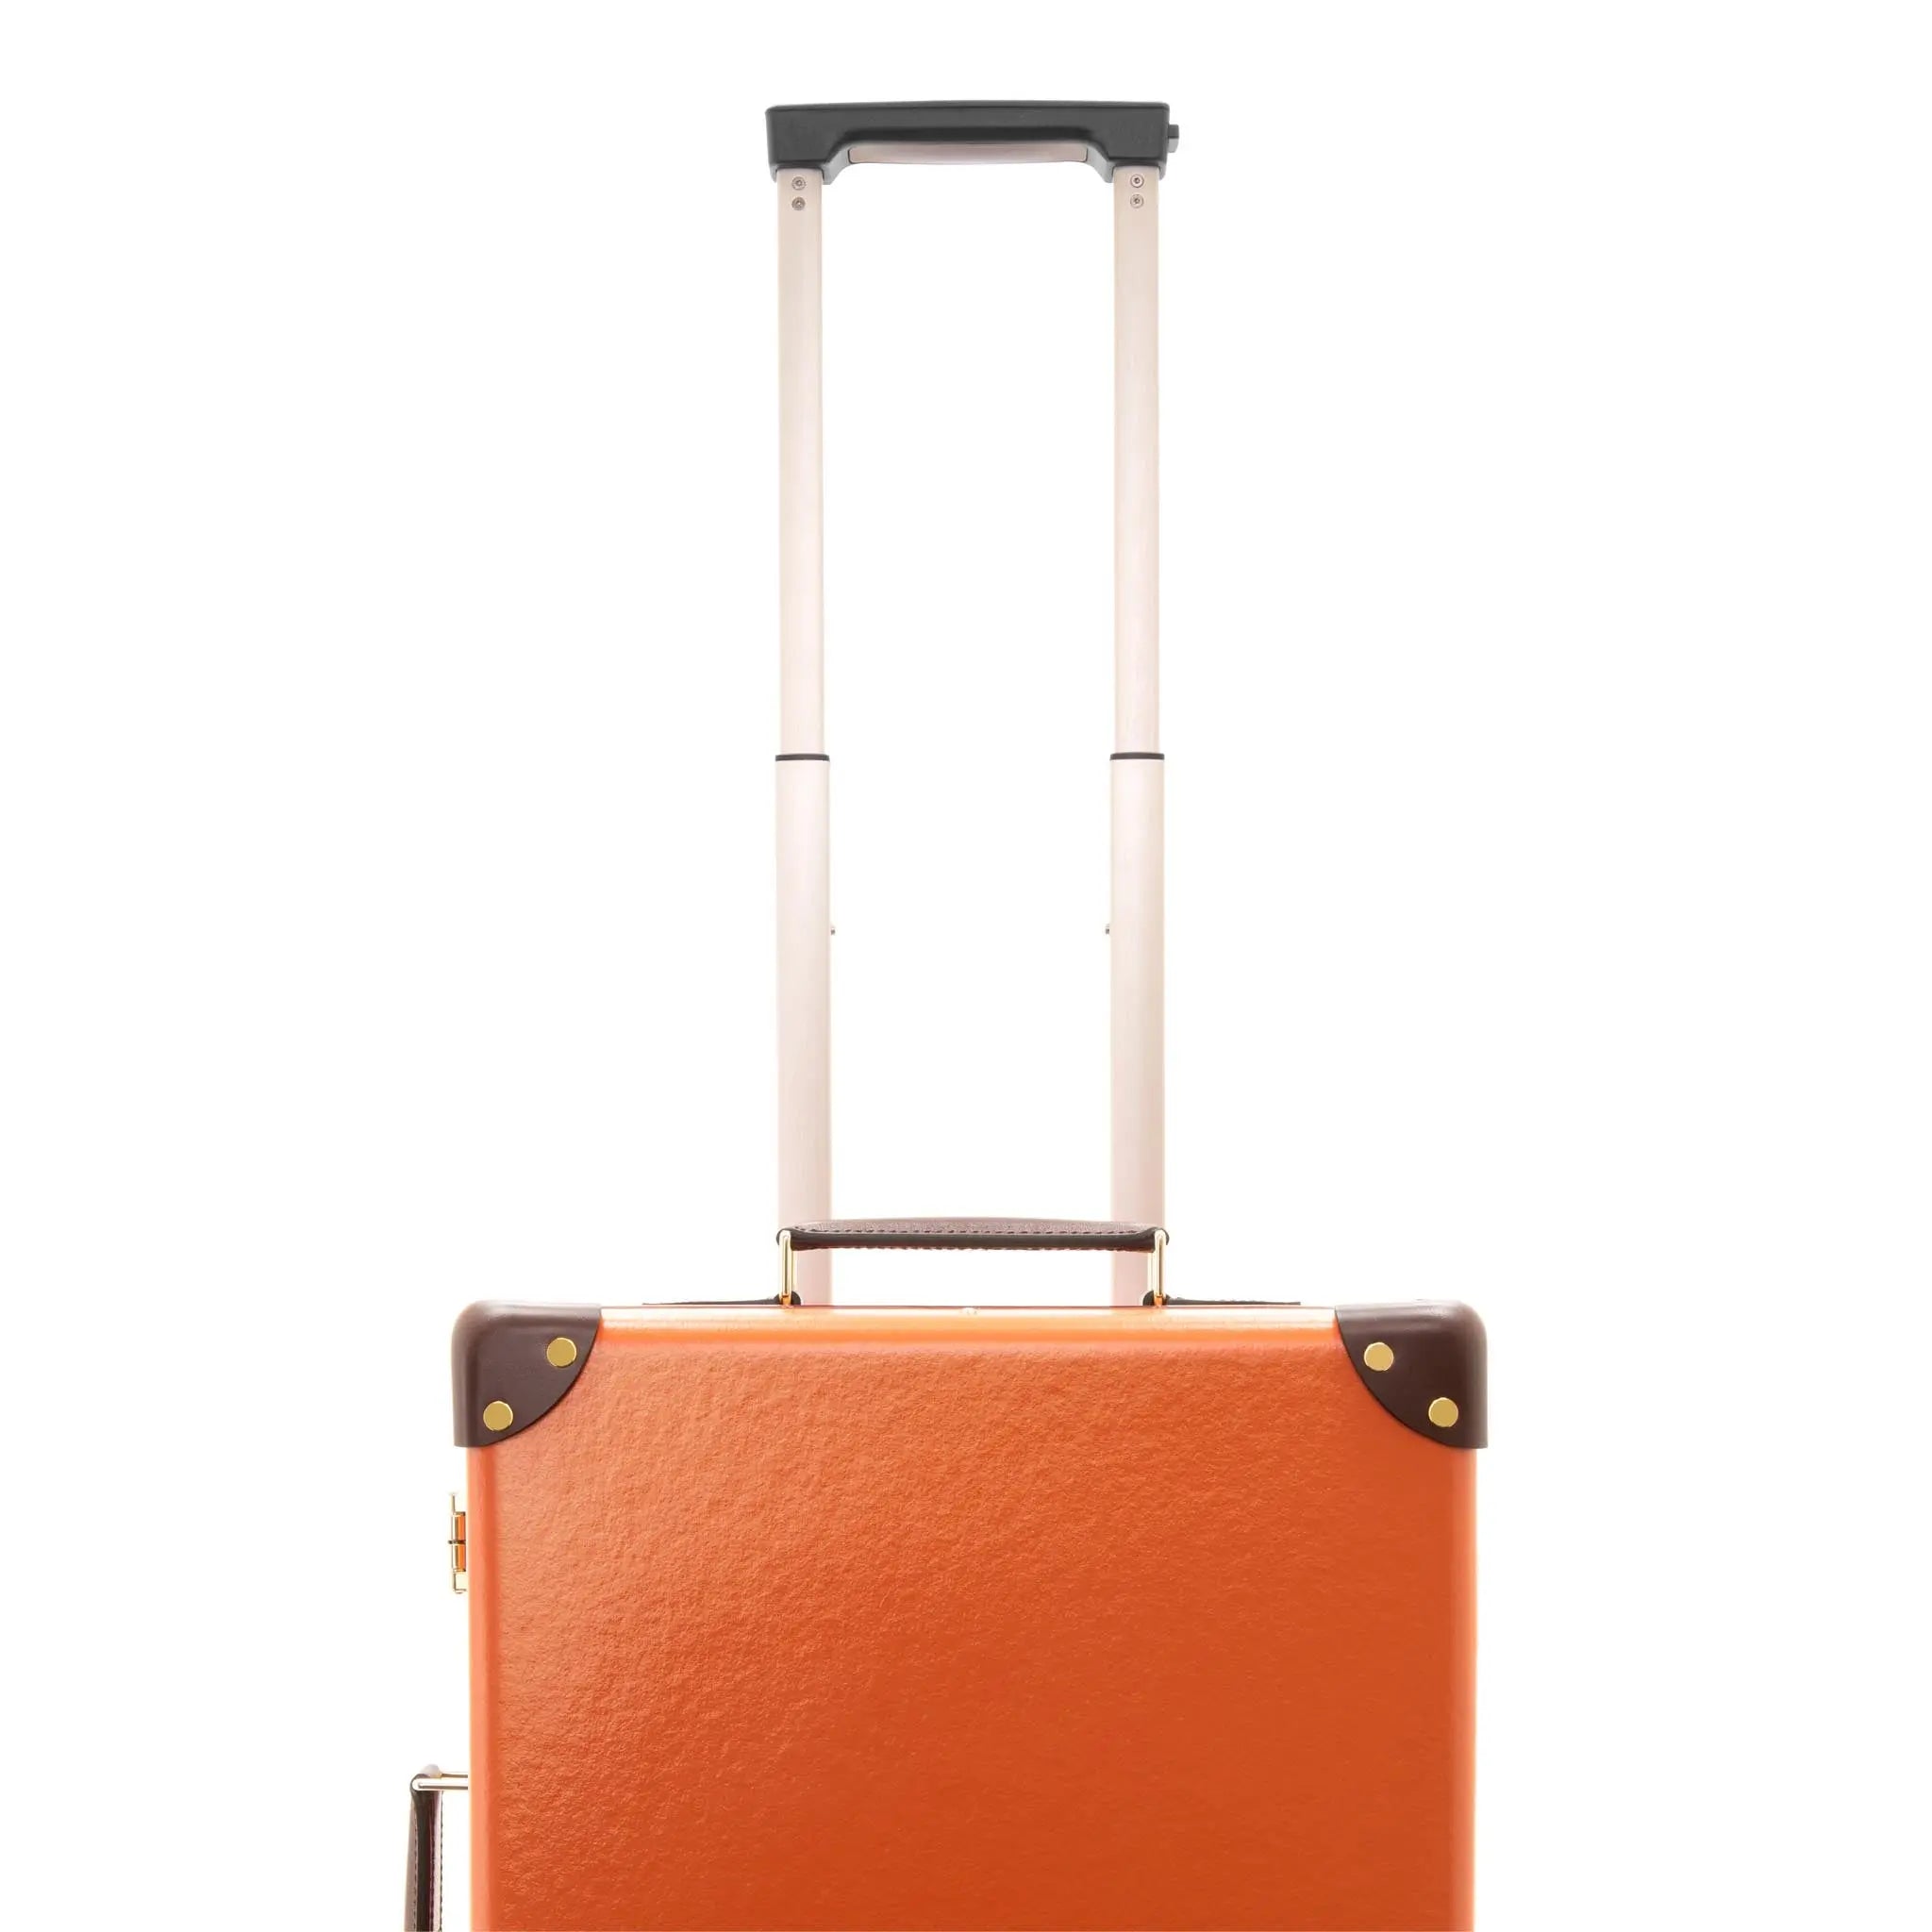 Centenary · Small Carry-On - 2 Wheels | Marmalade/Brown/Gold - GLOBE-TROTTER